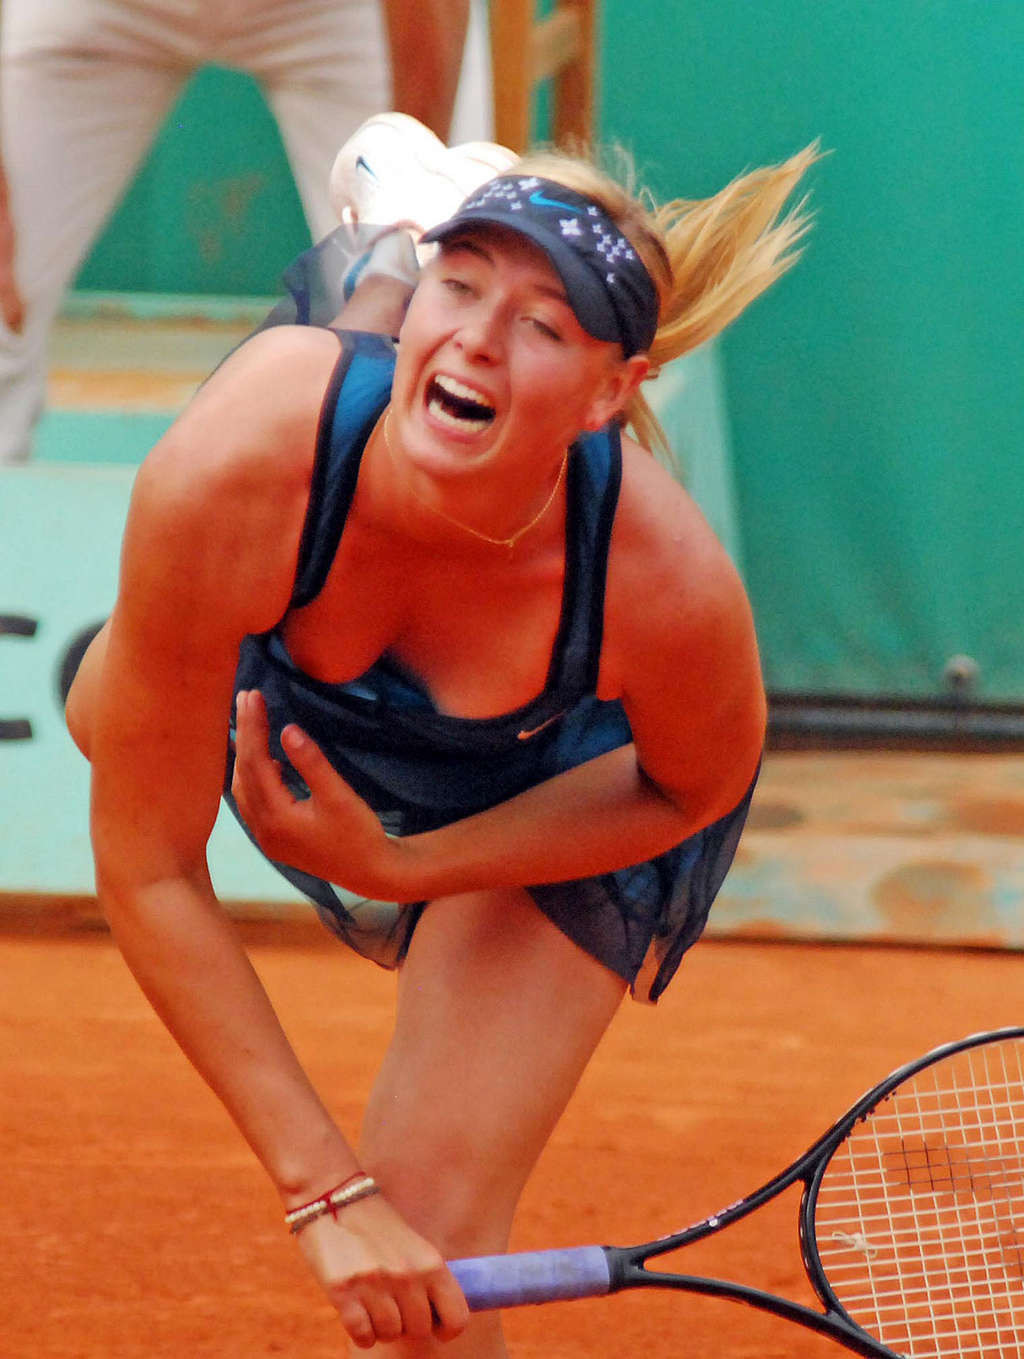 Maria Sharapova nipple slips and downblouse on court paparazzi pictures #75370796